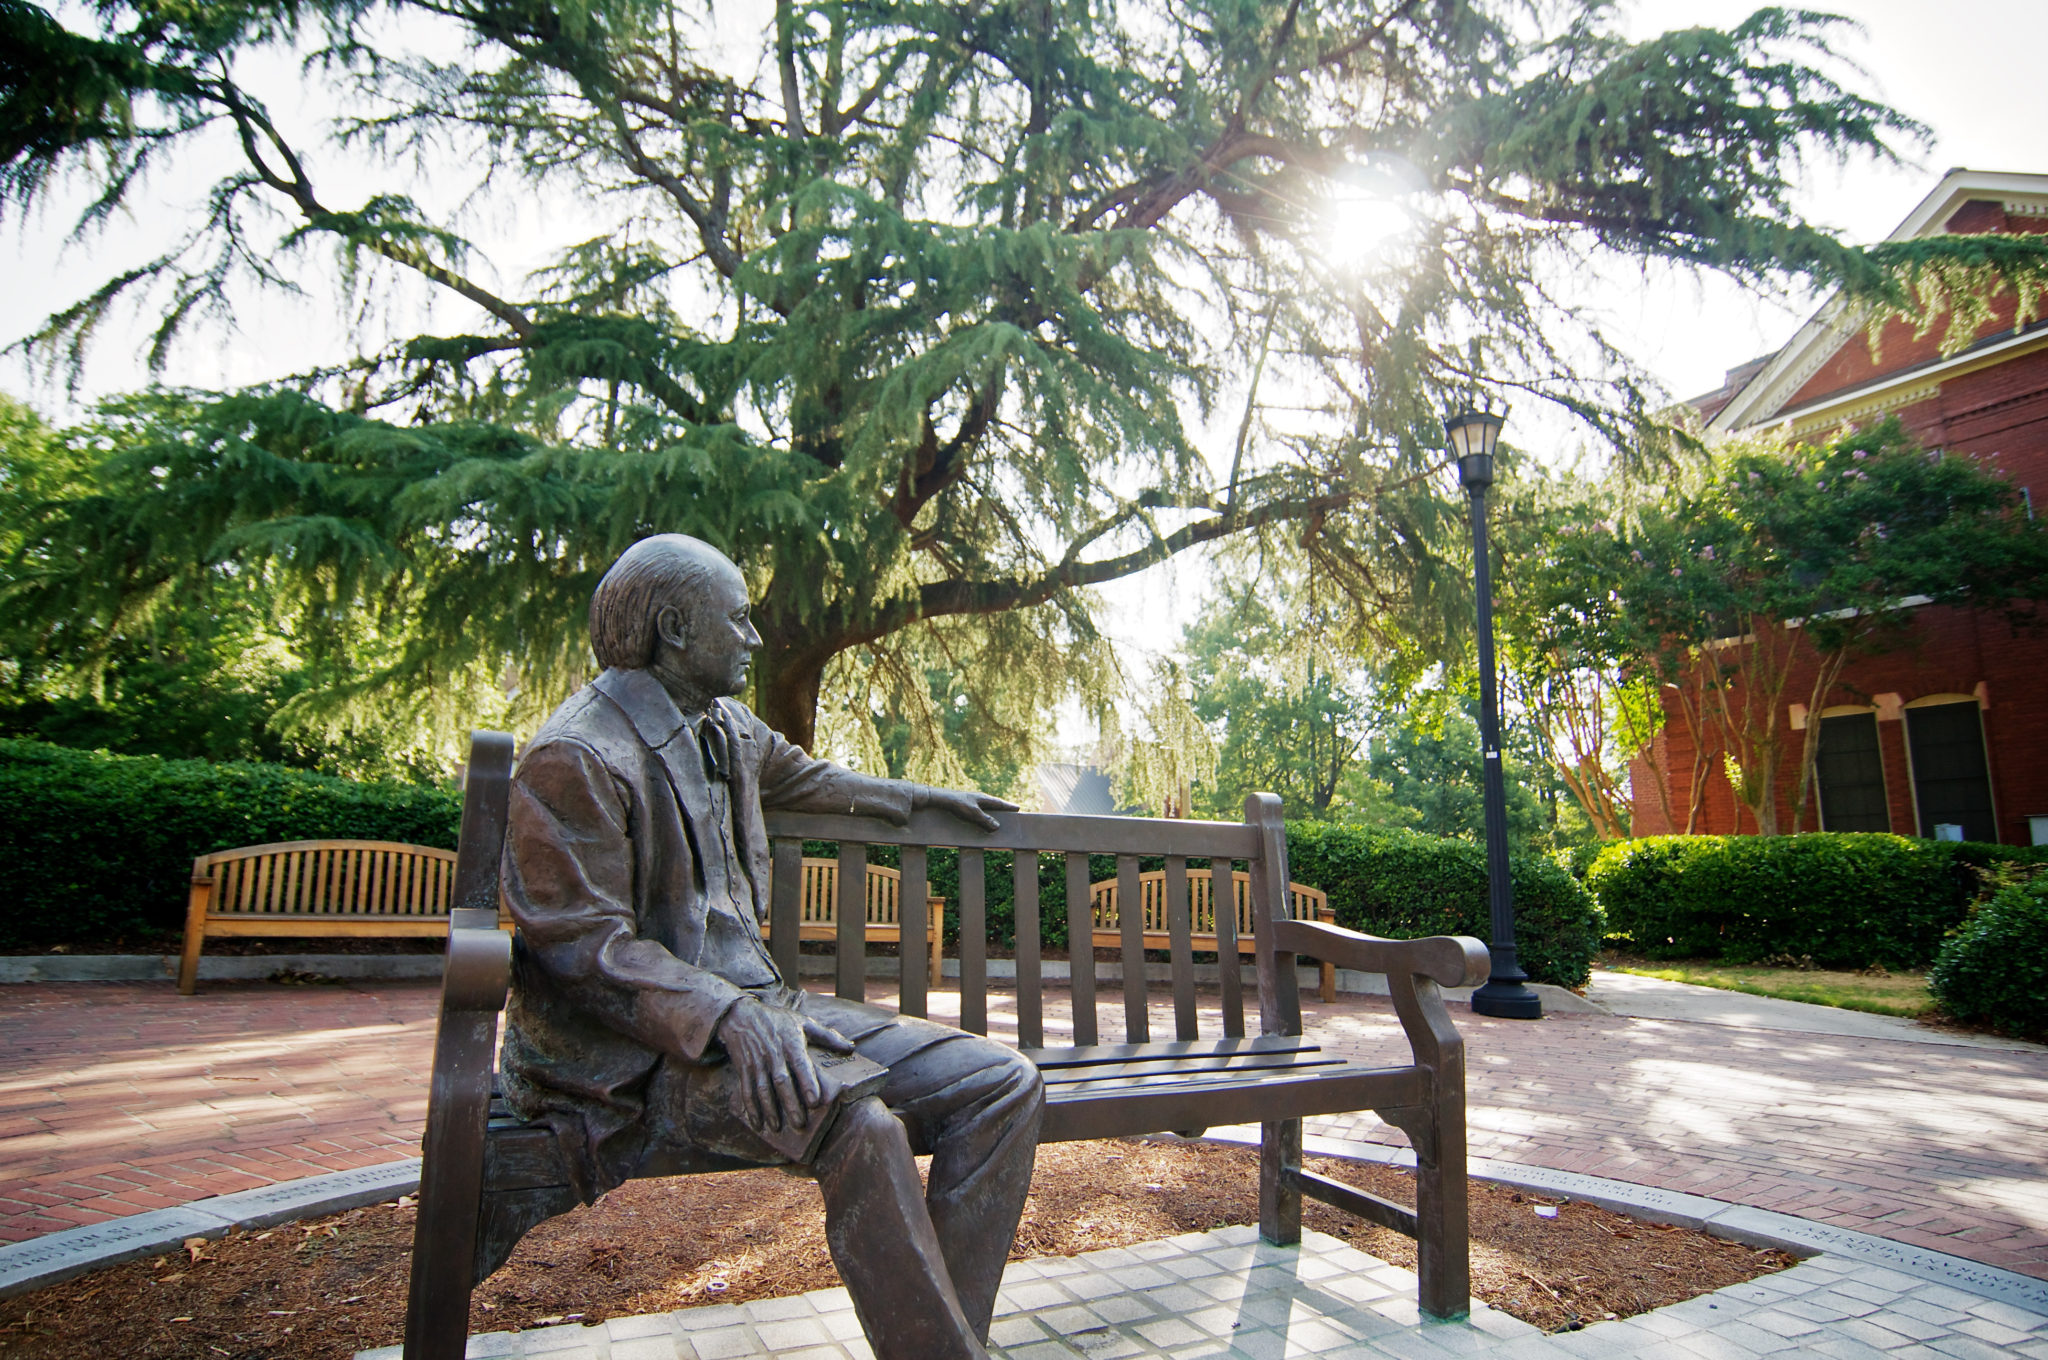 The Jesse Mercer statue is pictured with afternoon sun shining